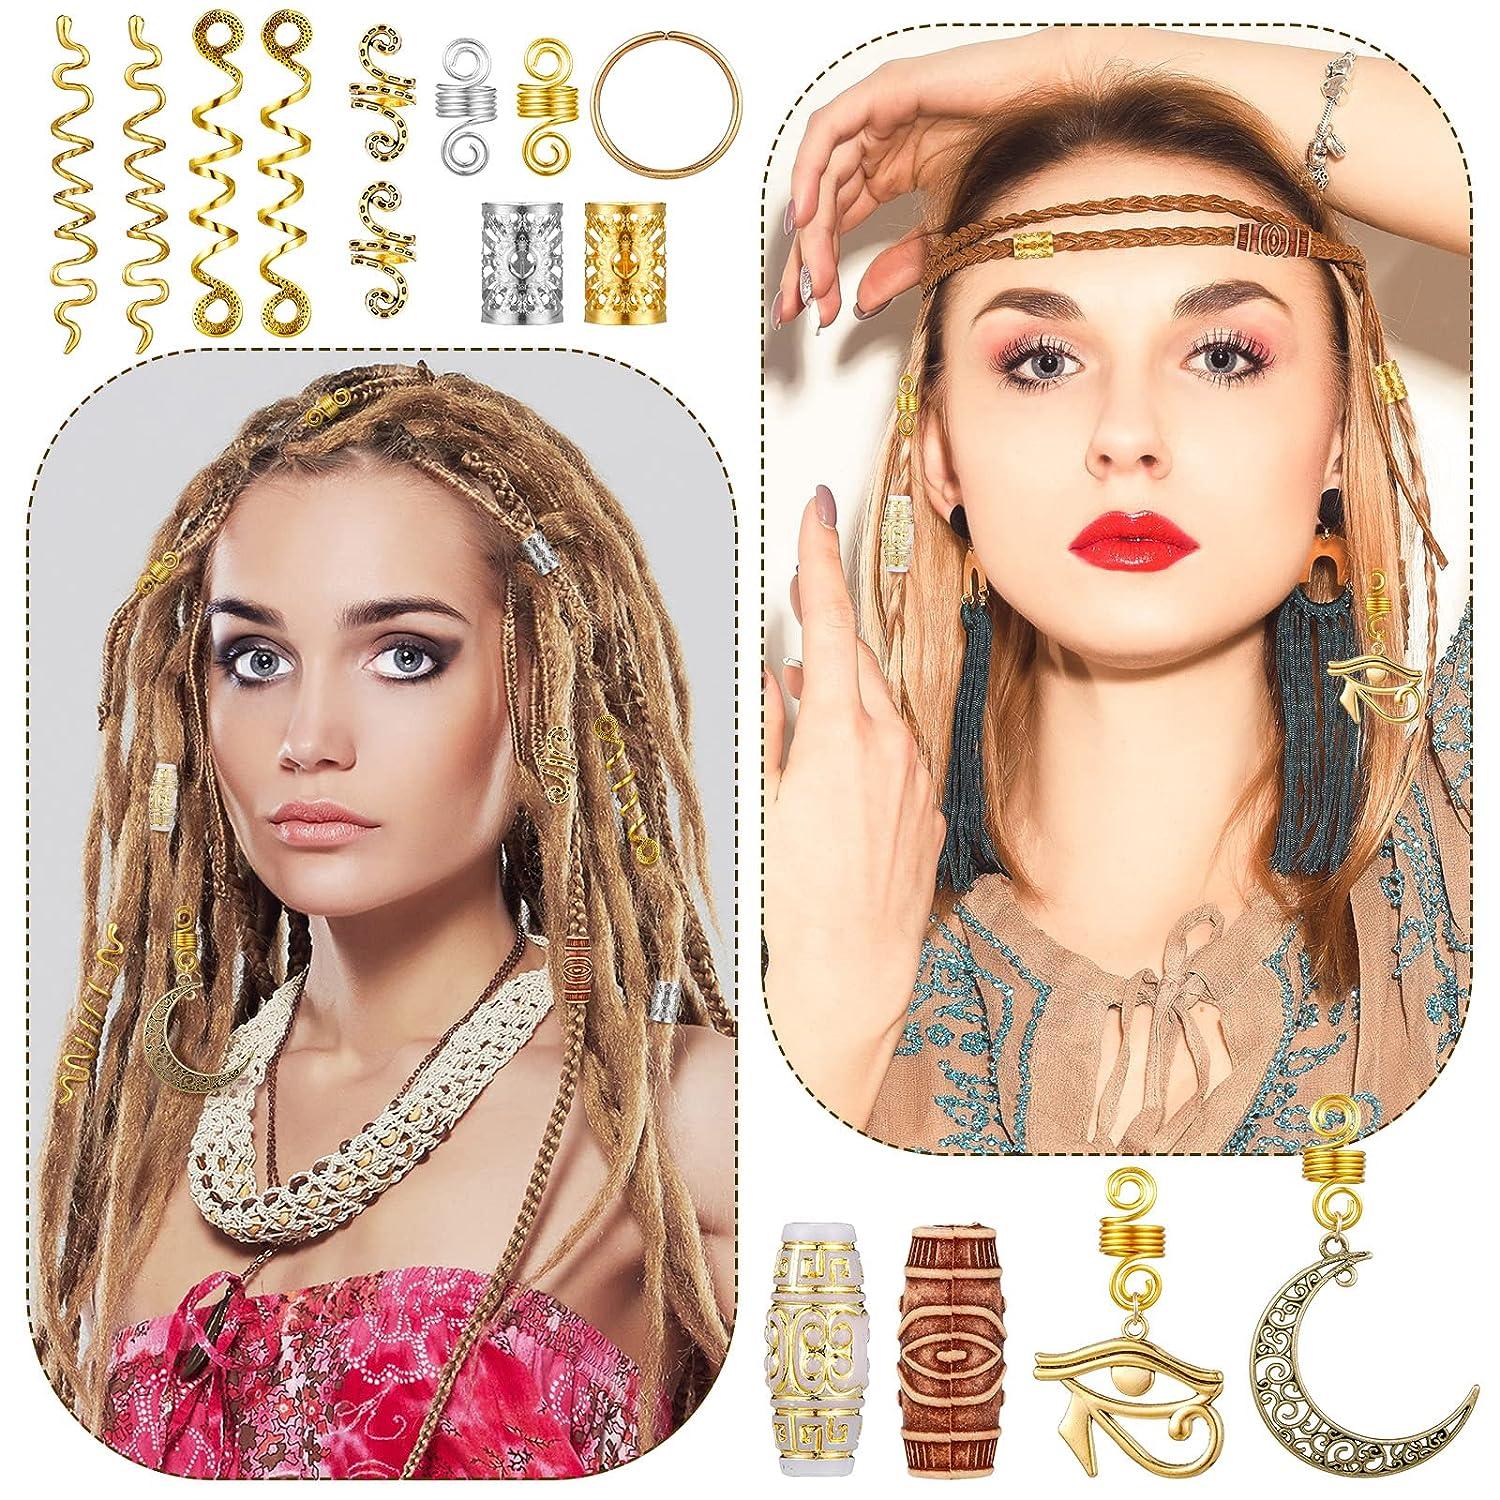 Woeoe Crystals Braid Jewelry Gold Star Hair Charms Rhinestones Beads  Dreadlock Accessories for Women and Girls(6PCS)